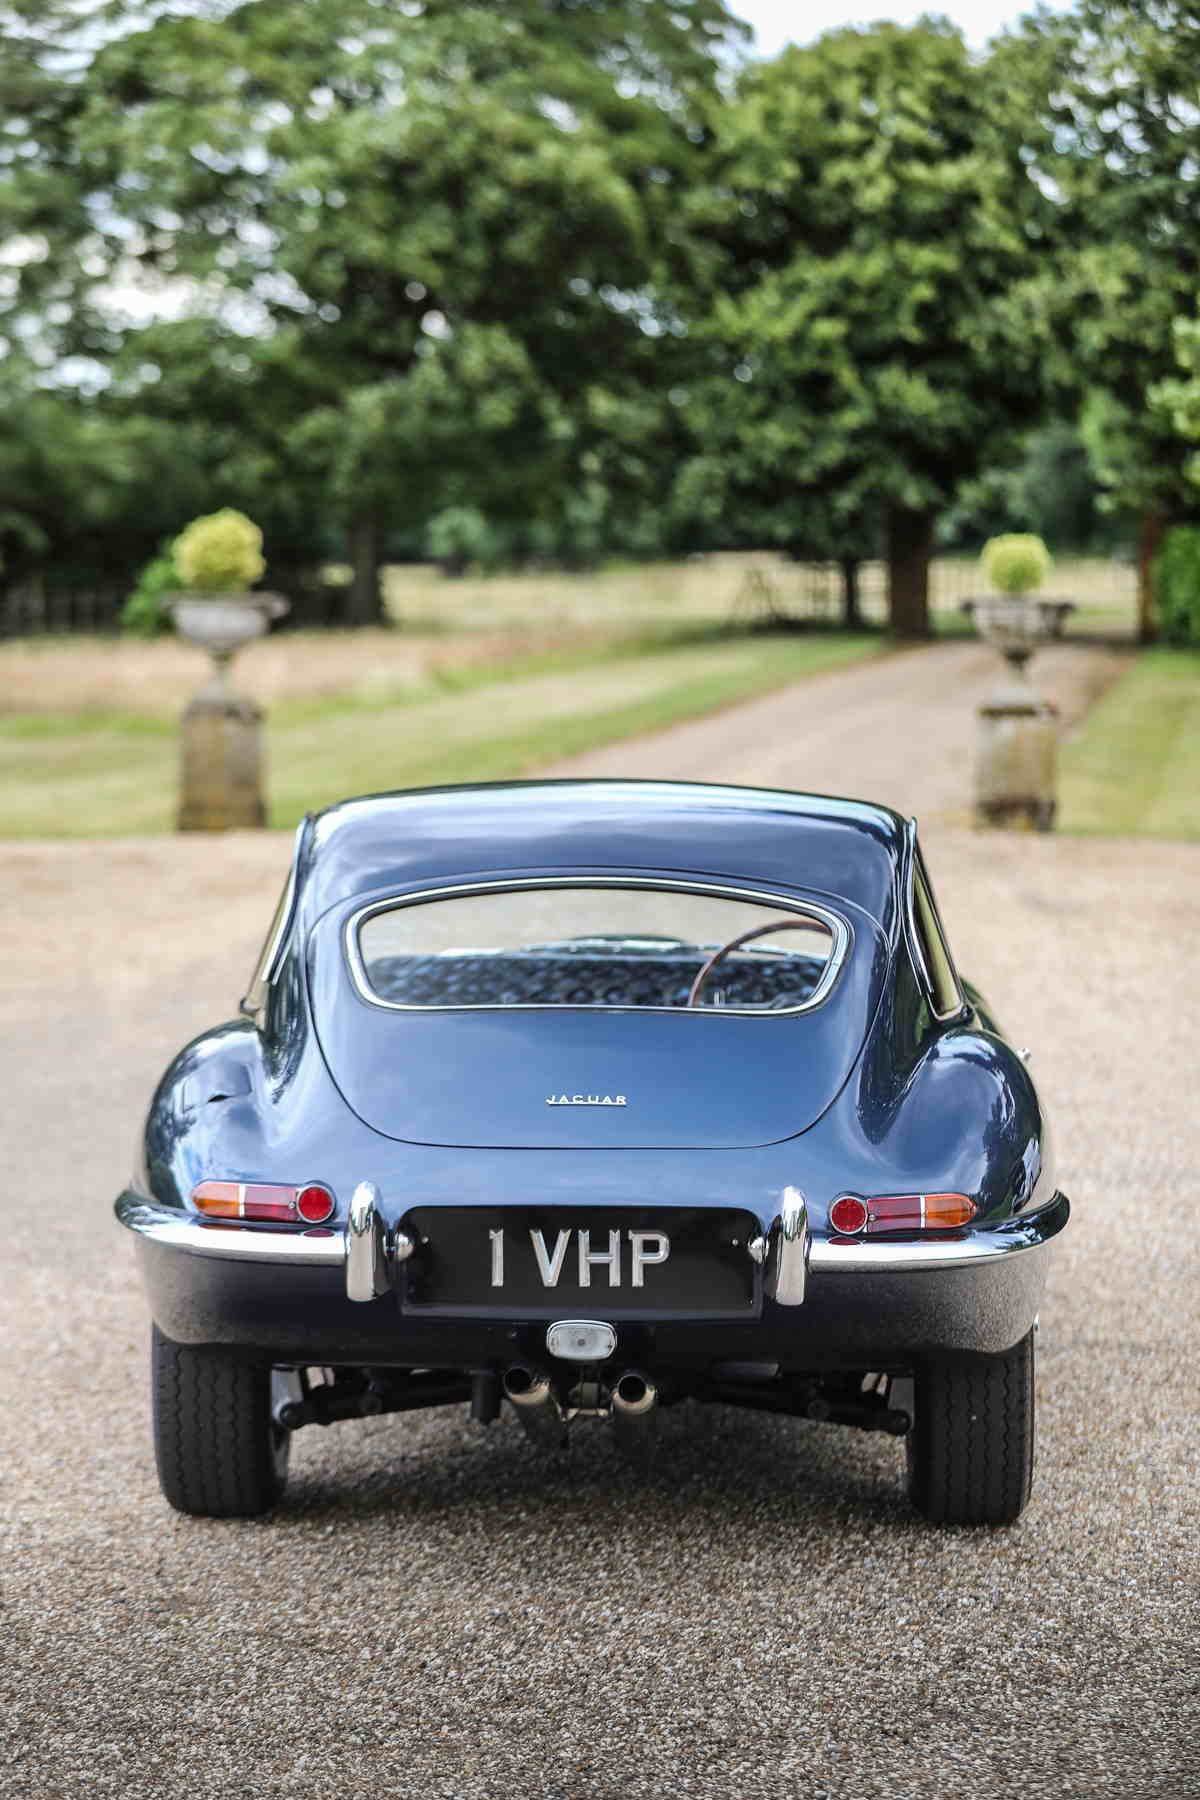 1961 E-Type Series I 3.8-Litre Fixed Head Coupe chassis number one, estimate £1,000,000-£1,400,000. Image: SWNS